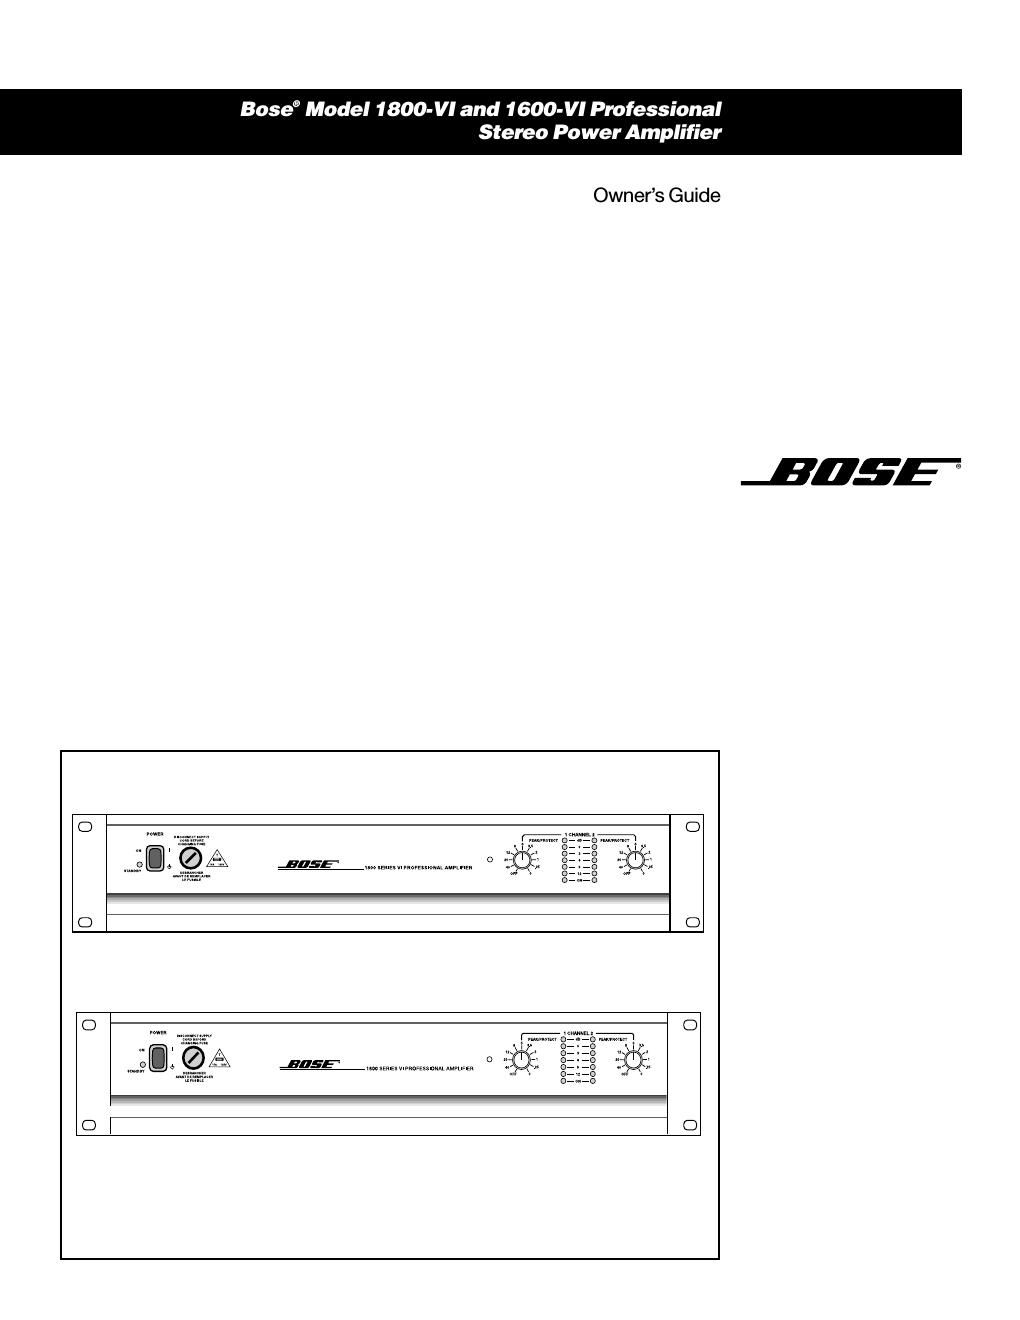 bose 1600 vi owners guide